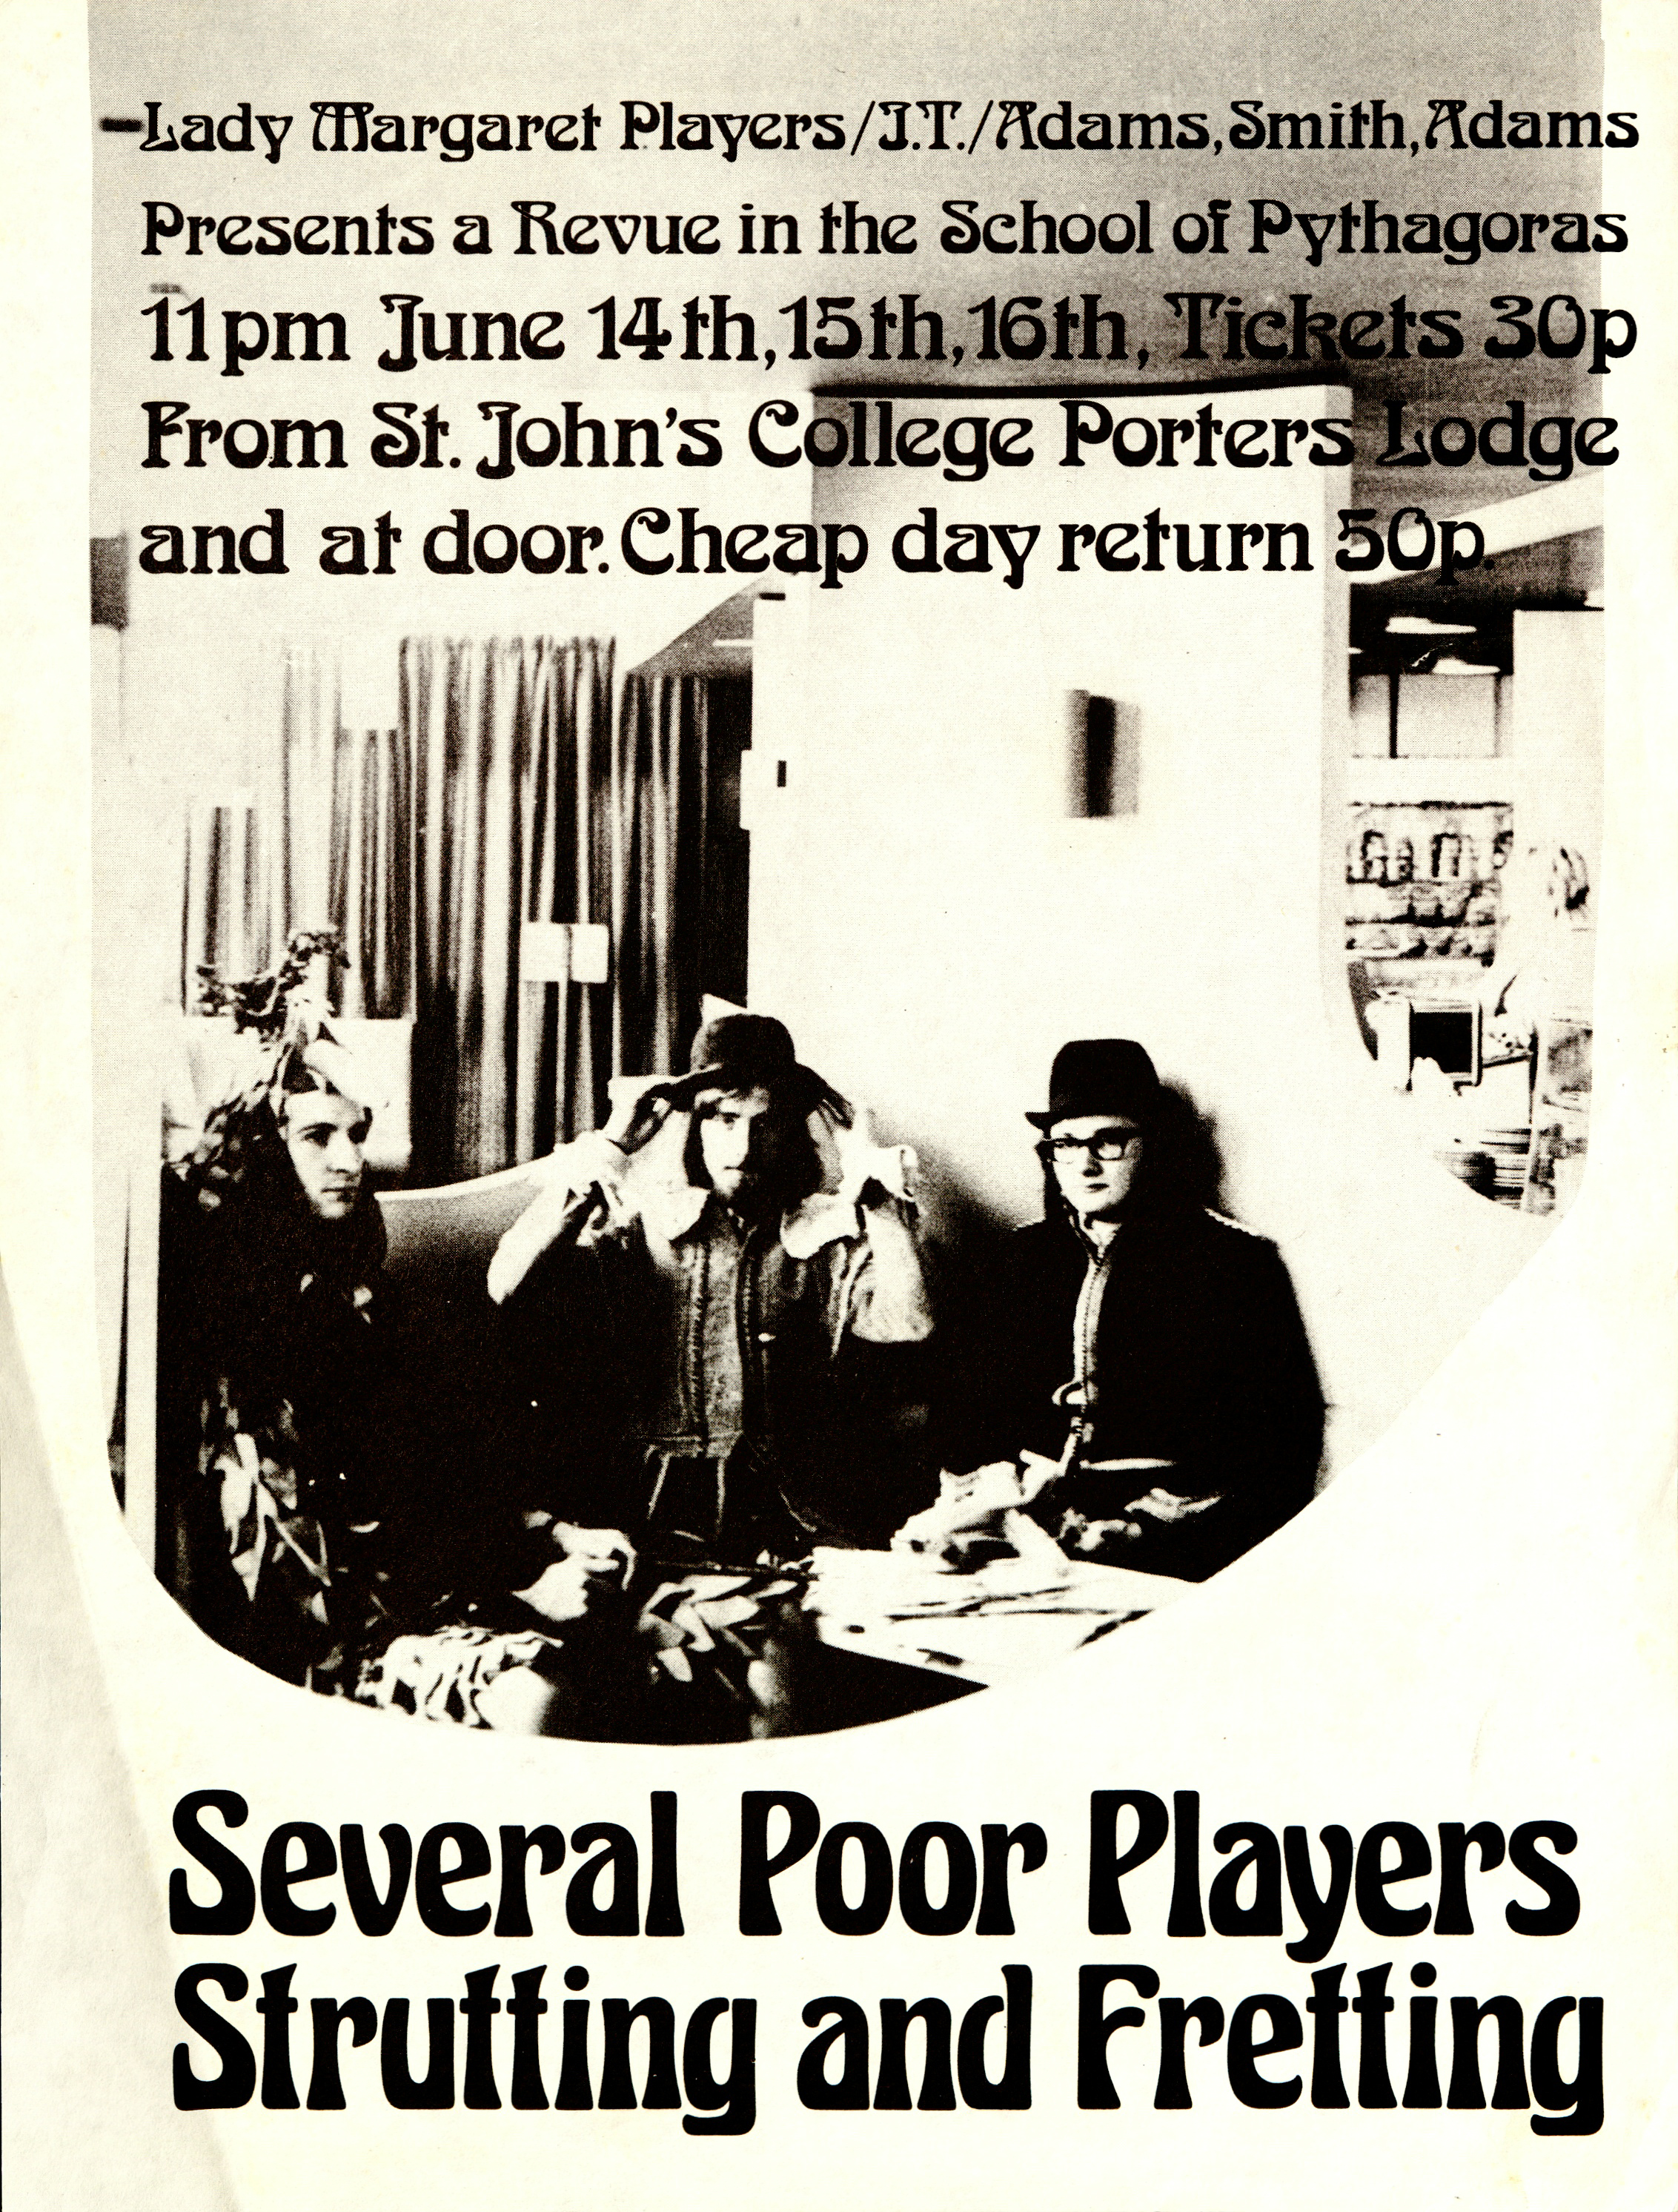 Lady Margaret Players poster owned by Douglas Adams